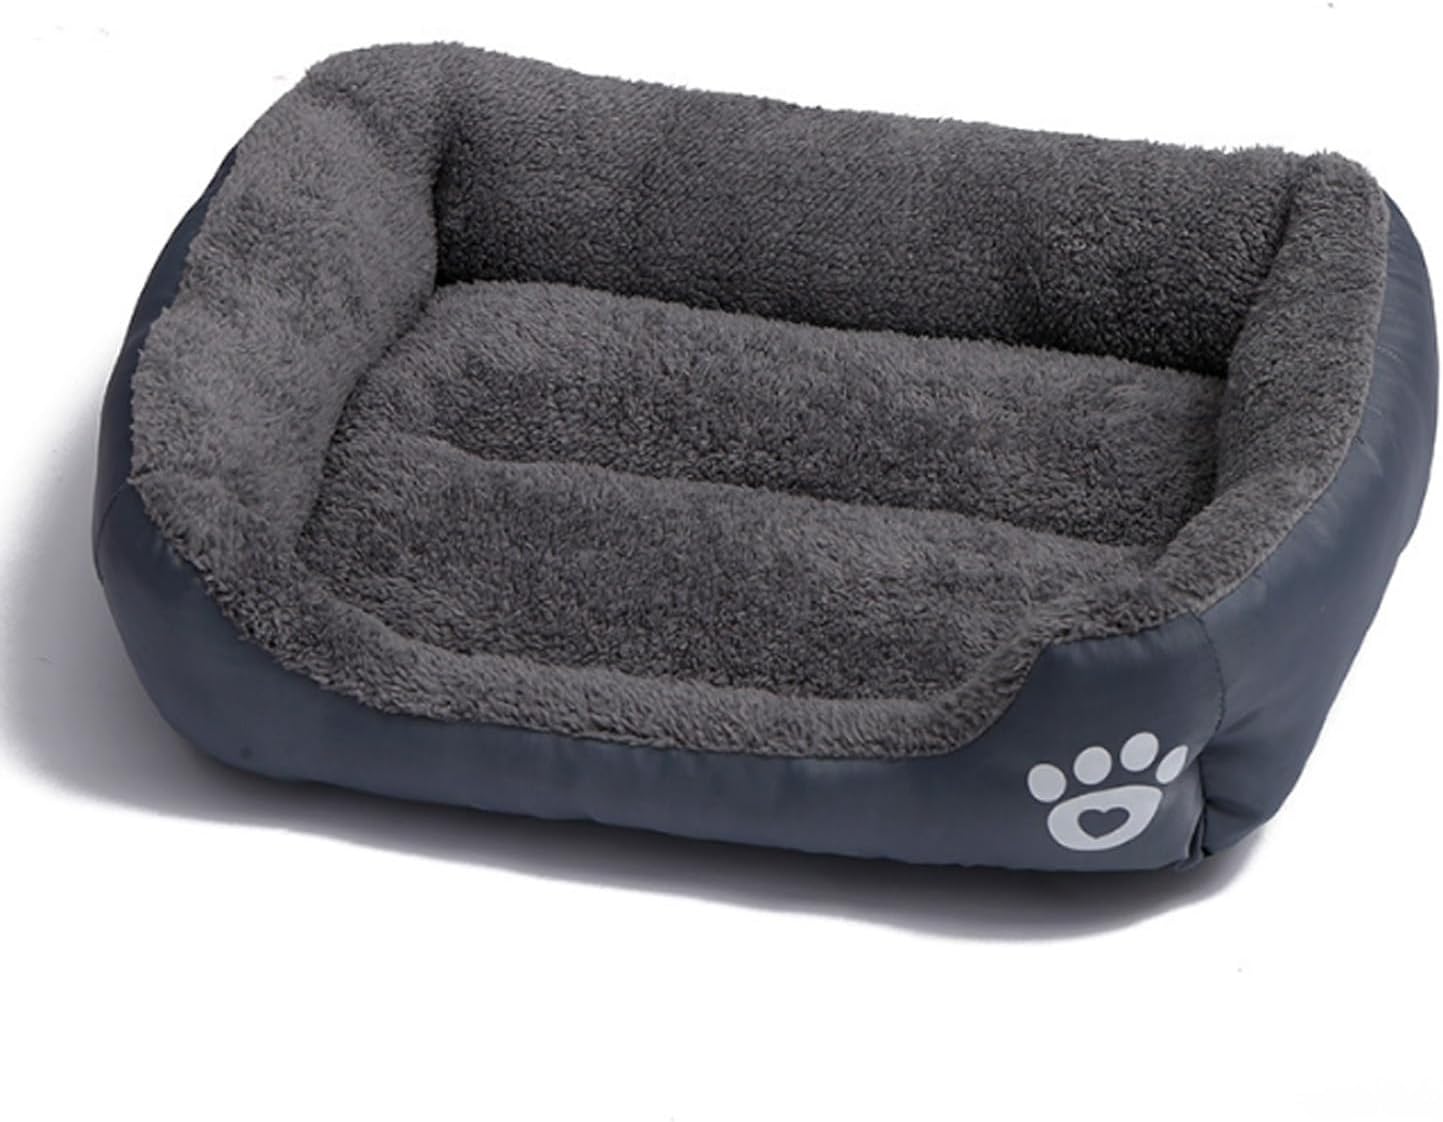 Grizzly Square Dog Bed Grey Large - 66 x 50cm Square Dog Bed